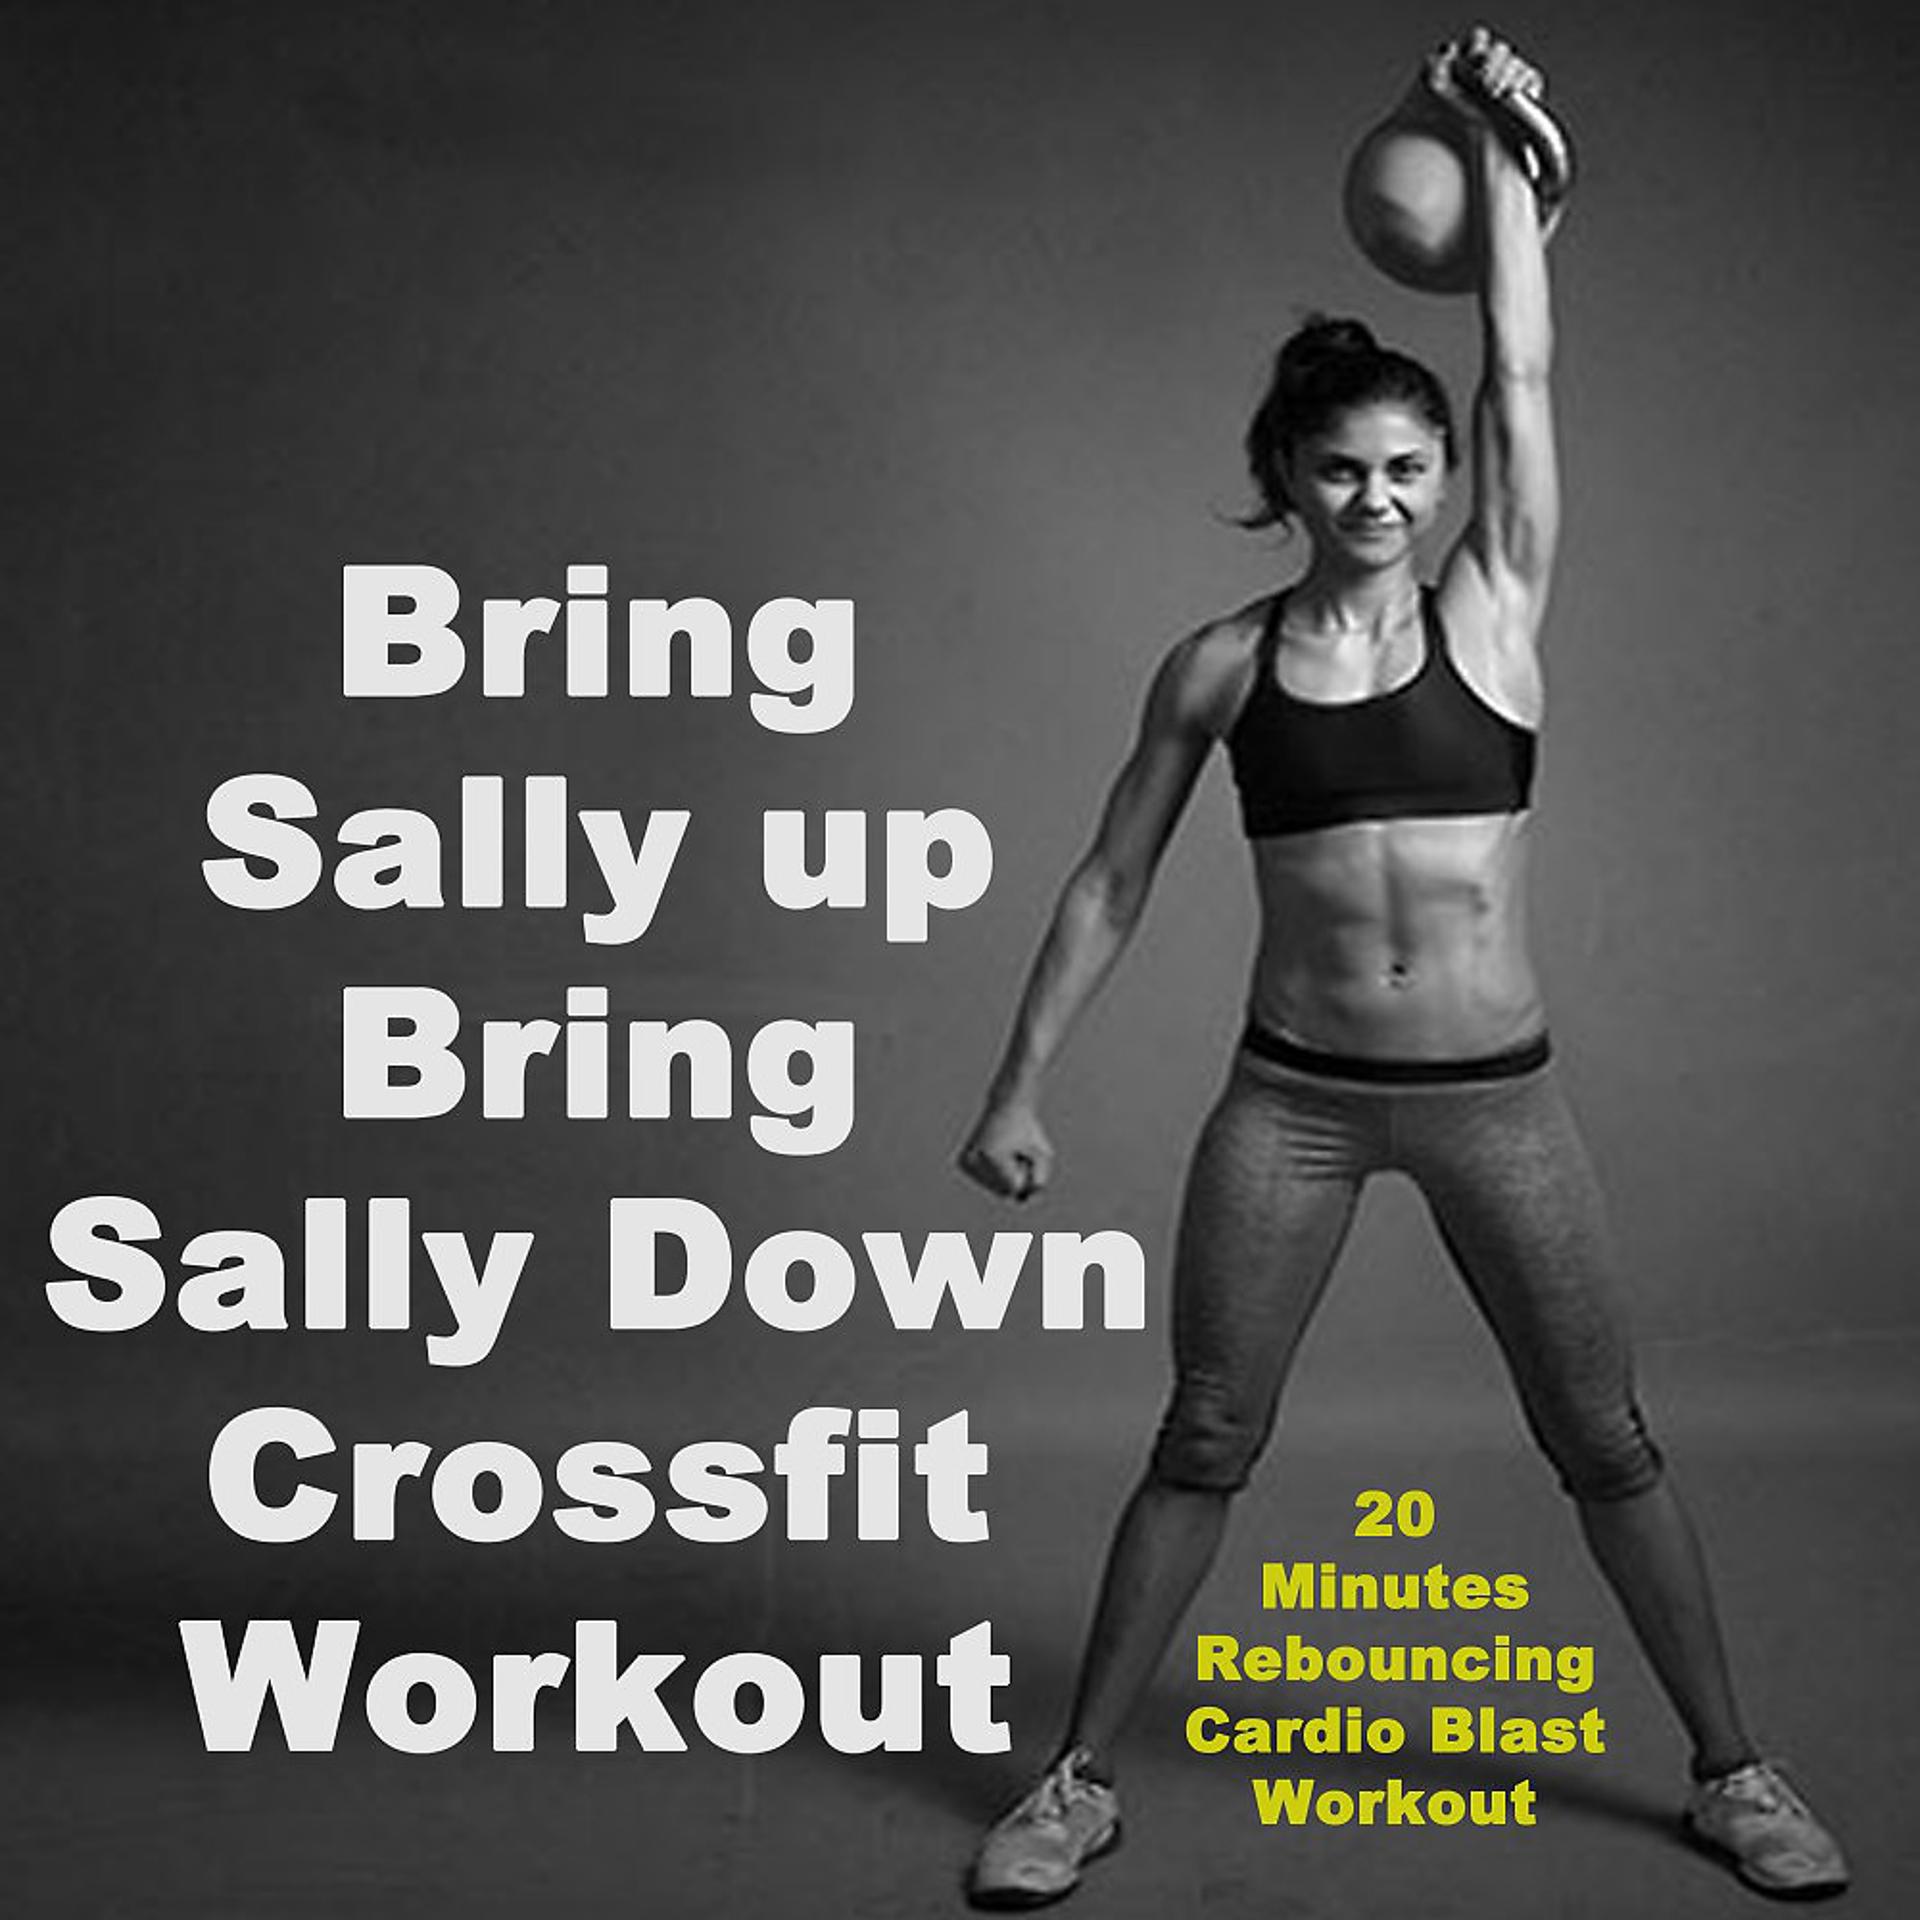 Постер альбома Bring Sally up Bring Sally Down Crossfit Workout (20 Minutes Rebouncing Cardio Blast Workout) & DJ Mix [The Best Music for Aerobics, Pumpin' Cardio Power, Crossfit, Plyo, Exercise, Steps, Barré, Routine, Curves, Sculpting, Abs, Butt, Lean, Twerk, Slim Down Fitness Workout]